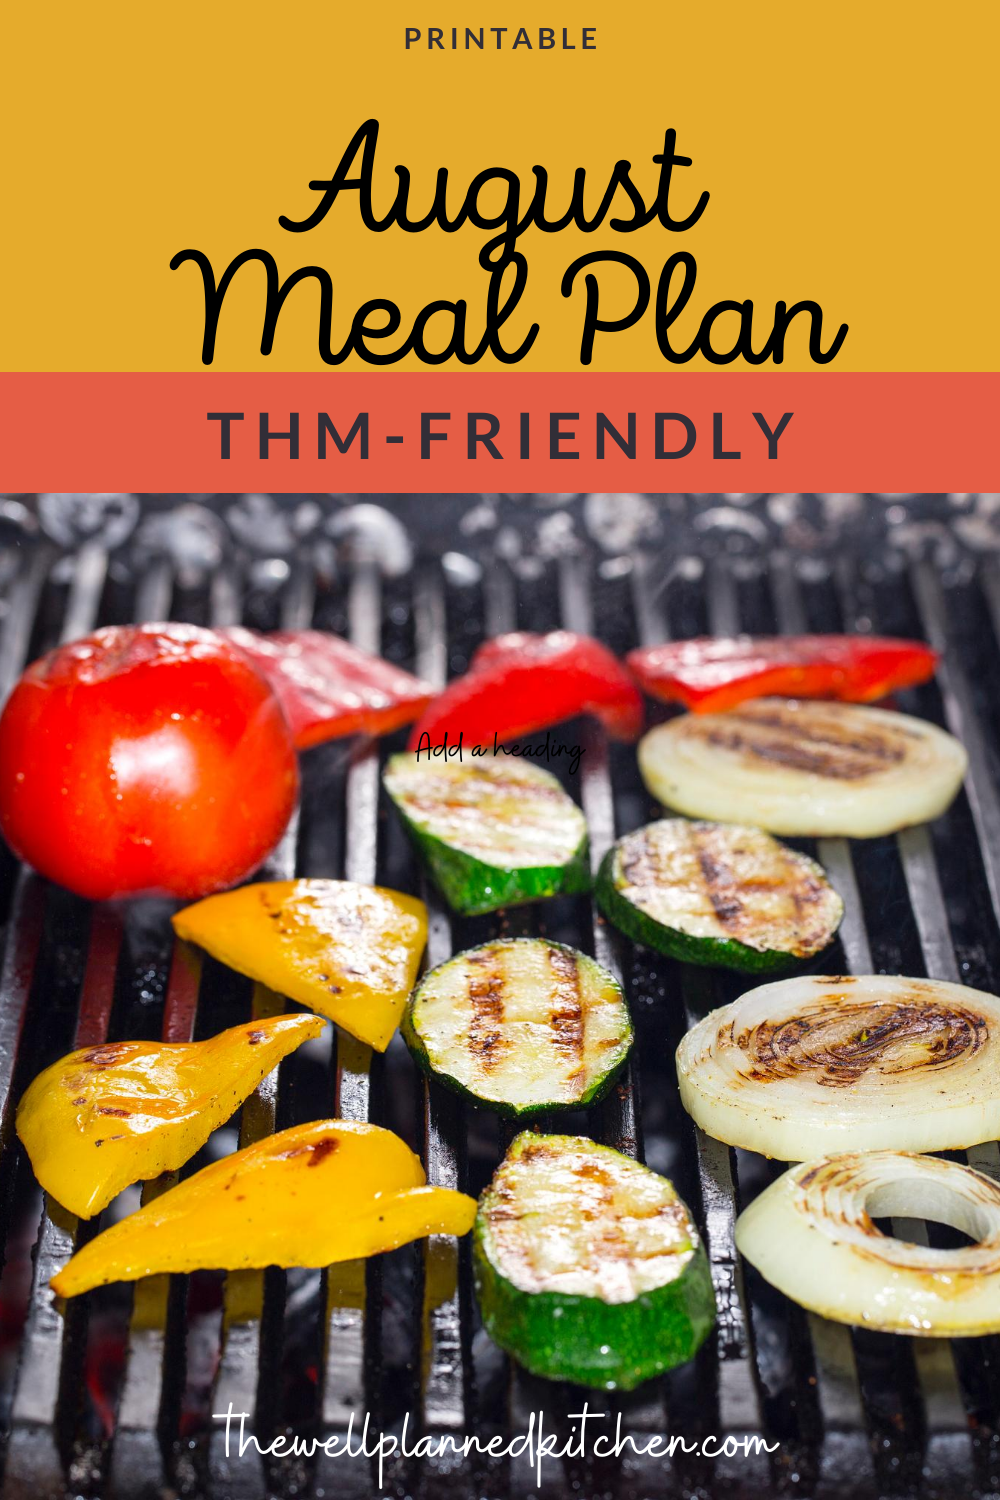 THM Meal Plan for August